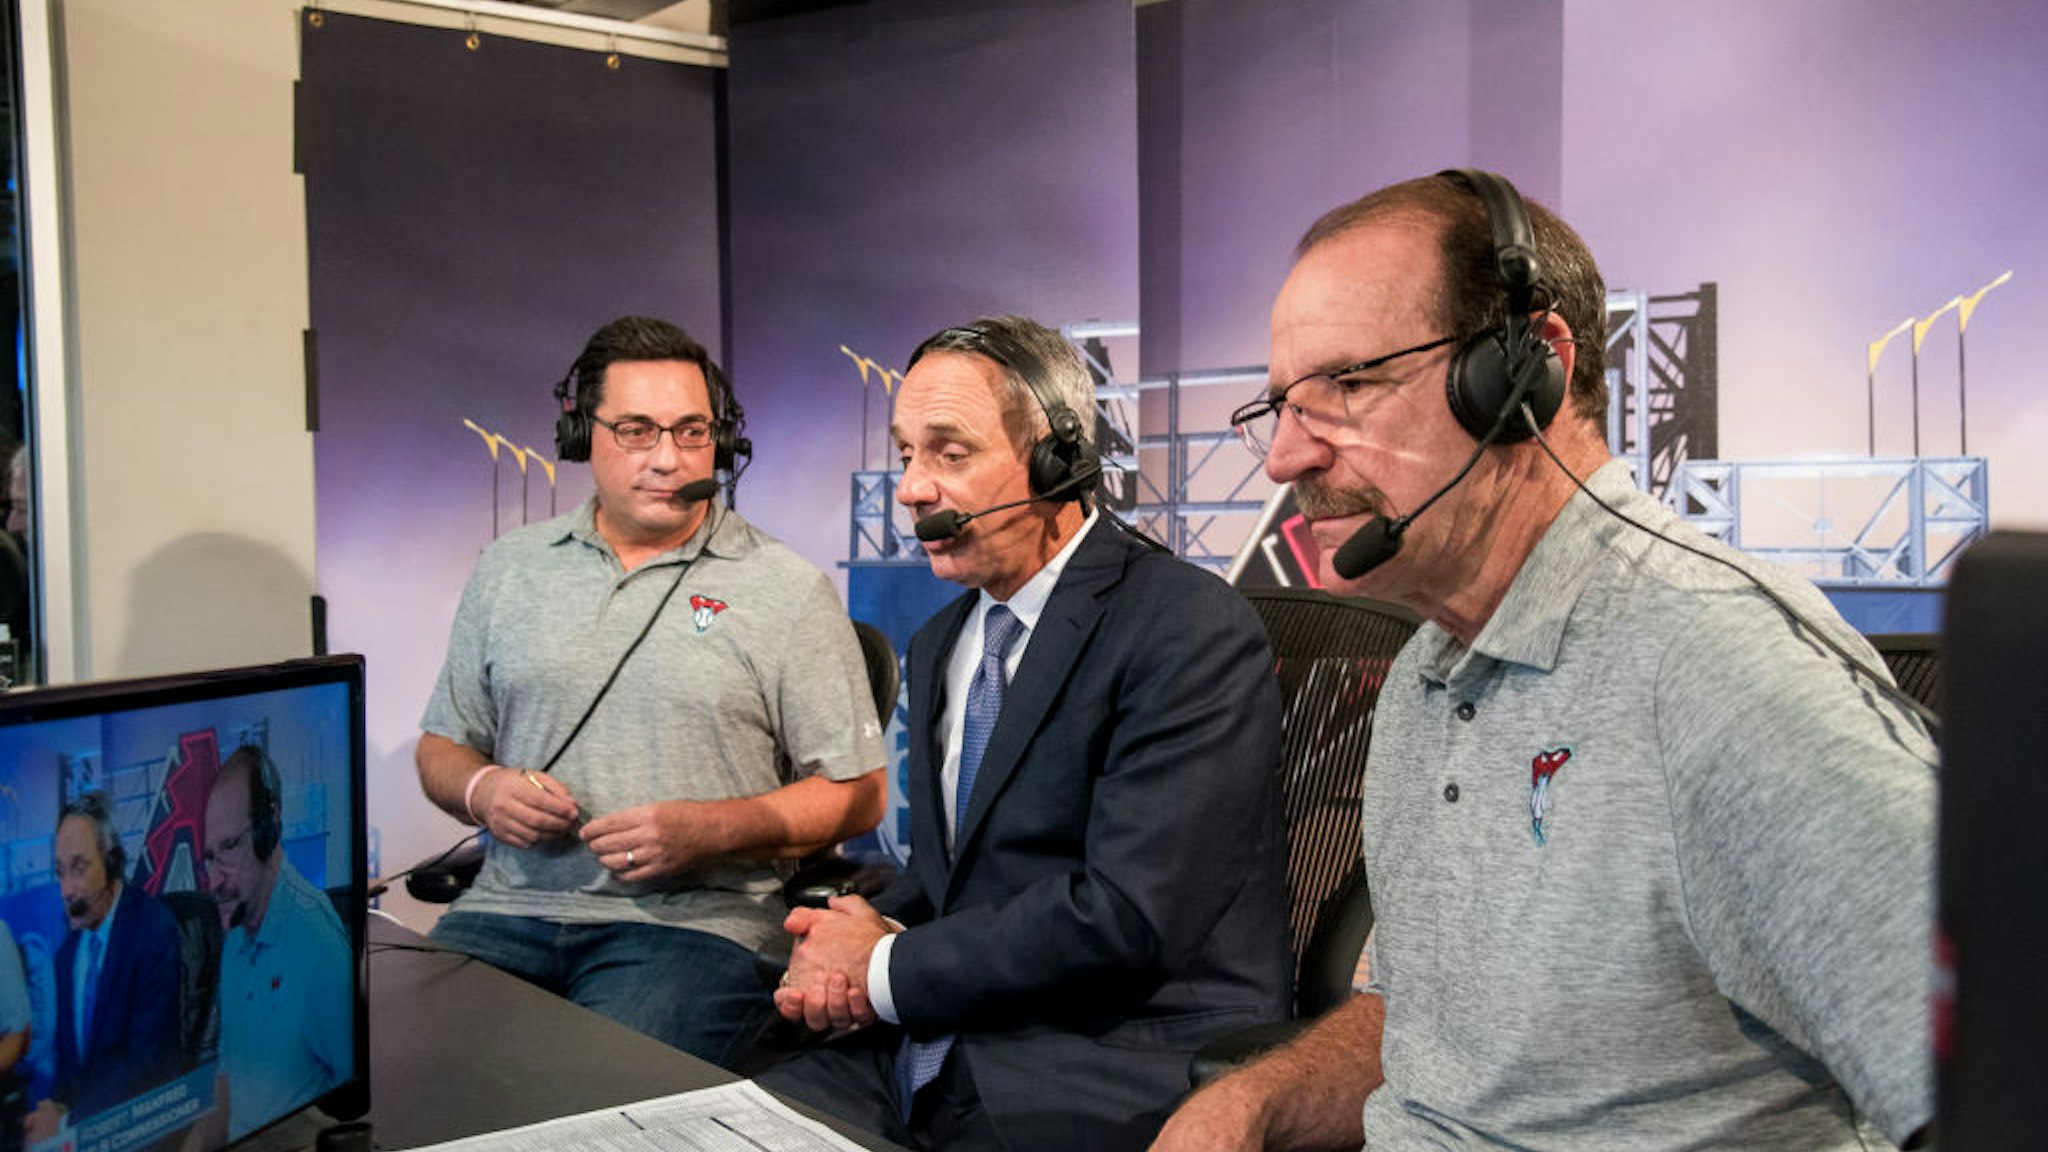 PHOENIX, AZ - JUNE 06: MLB Commissioner Rob Manfred makes an appearance on FOX Sports Arizona's TV broadcast with Steve Berthiaume and Bob Brenly during a game against the Arizona Diamondbacks and San Diego Padres at Chase Field on June 6, 2017 in Phoenix, Arizona. (Photo by Sarah Sachs/Arizona Diamondbacks/Getty Images)